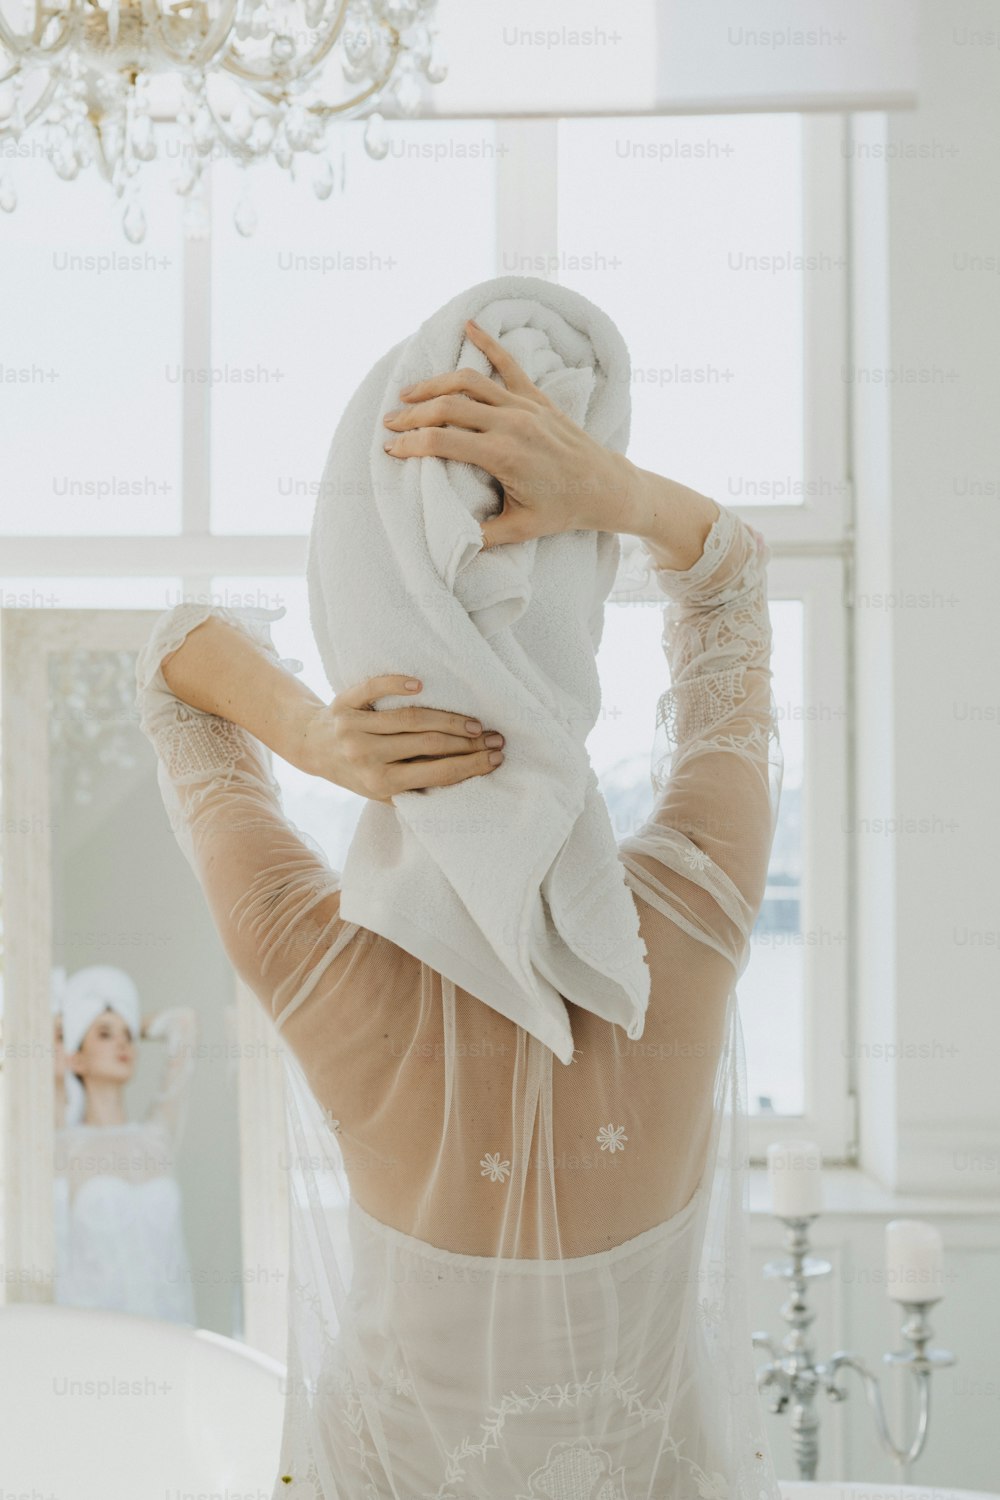 a woman in a wedding dress is holding a towel